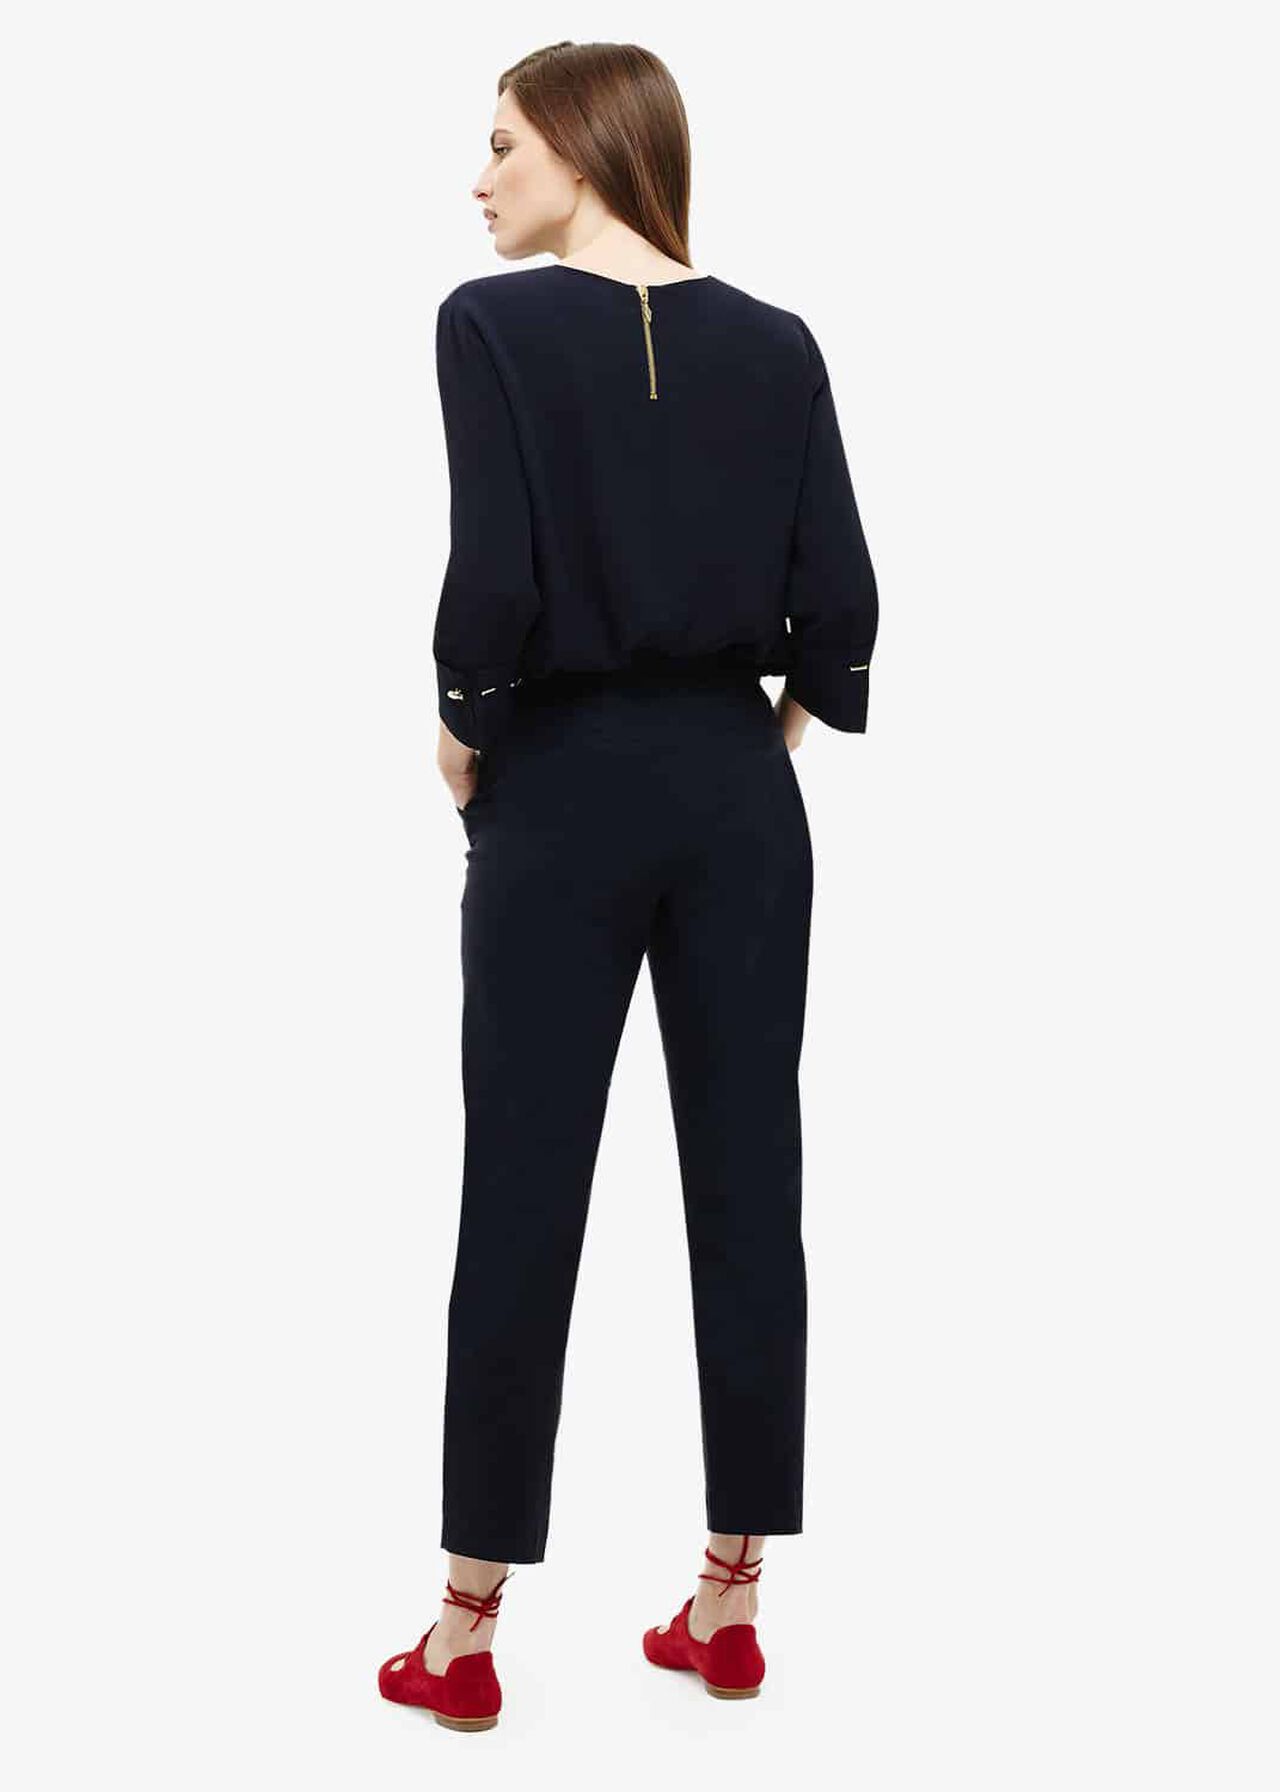 Racheal Ring Trousers